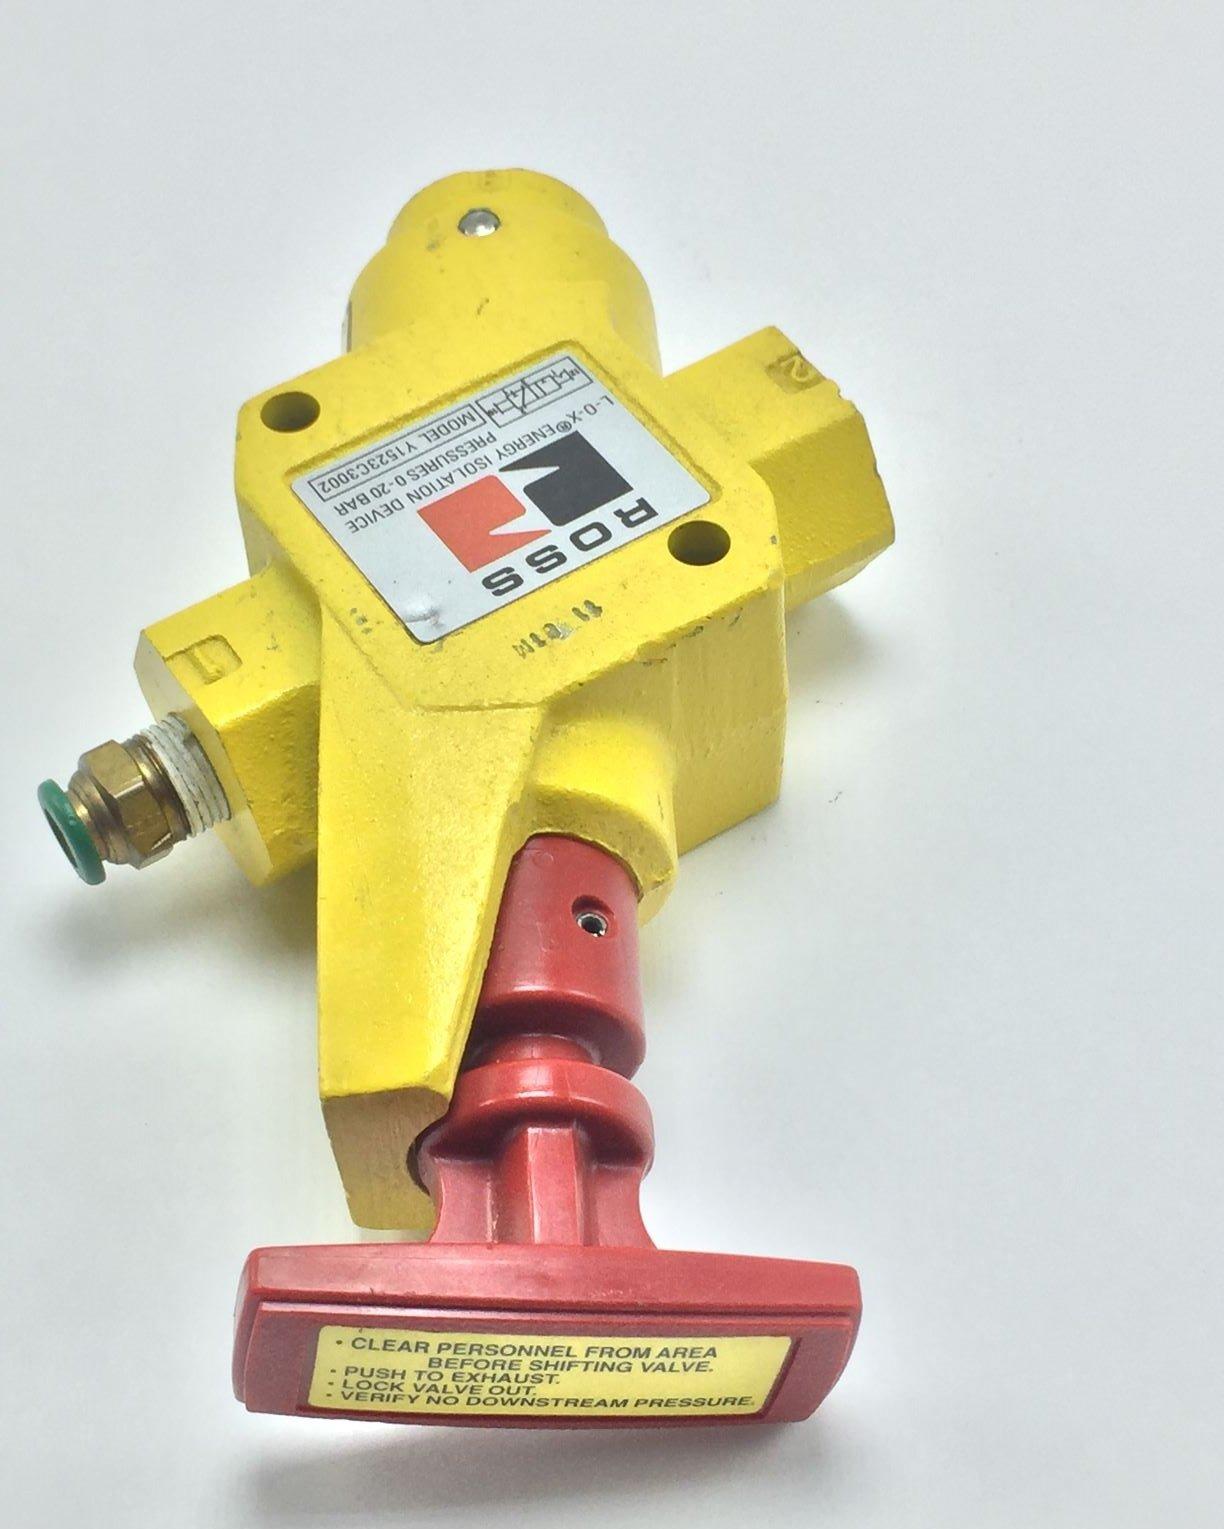  ROSS Y1523C3002 LOCKOUT VALVE TESTED 